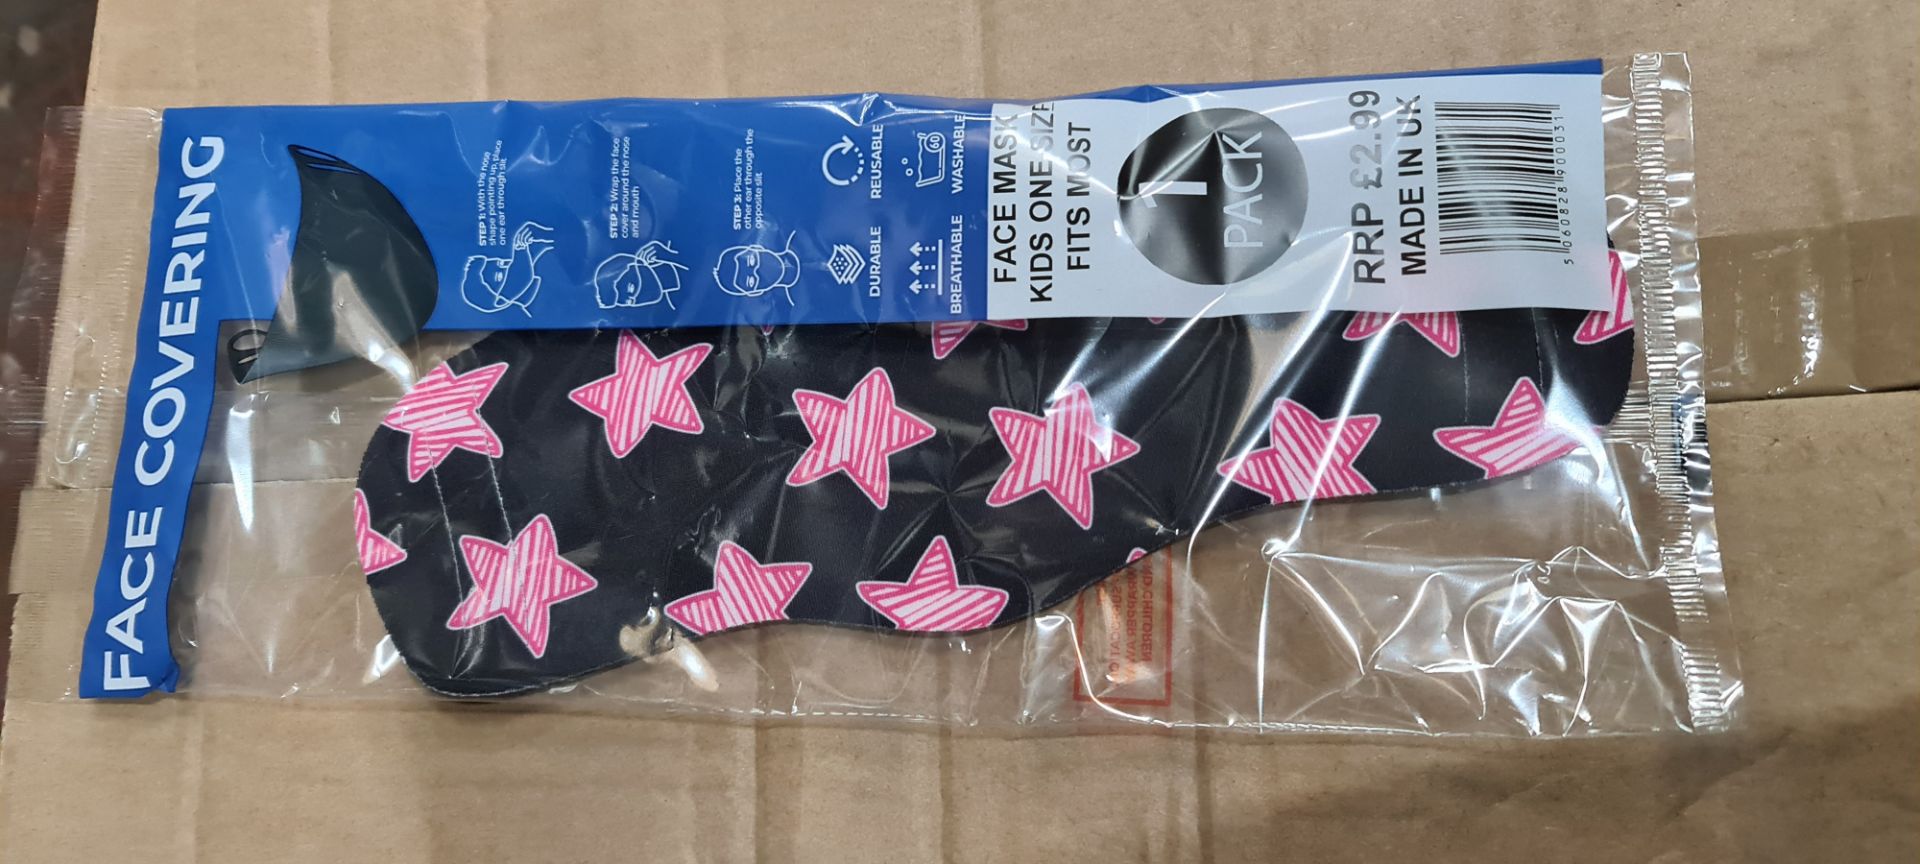 100 off kid's masks, individually packaged, in black with pink stars - Image 5 of 7